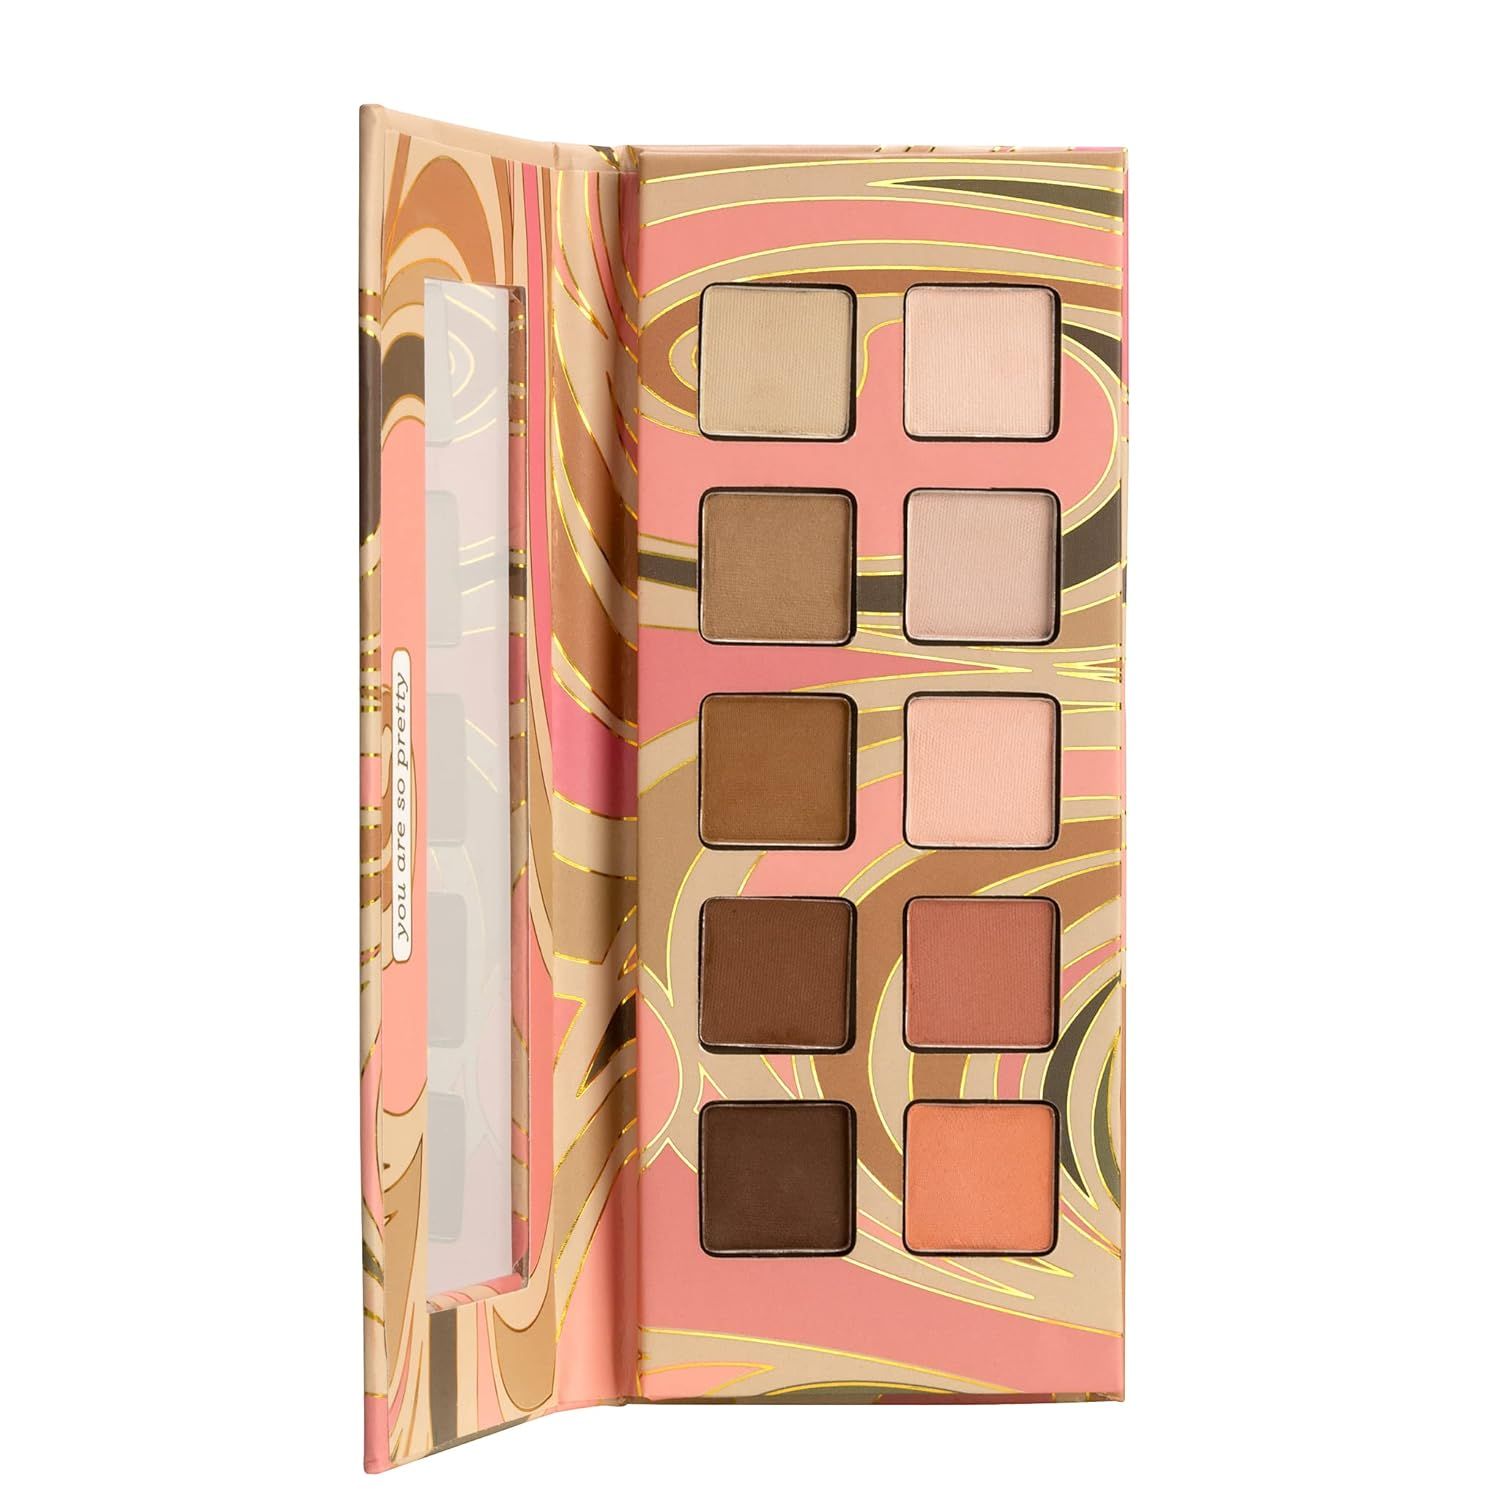 Pacifica 10-Shade Pink Nude Mineral Eyeshadow Palette - Vegan, Cruelty-Free | Amazon (US)